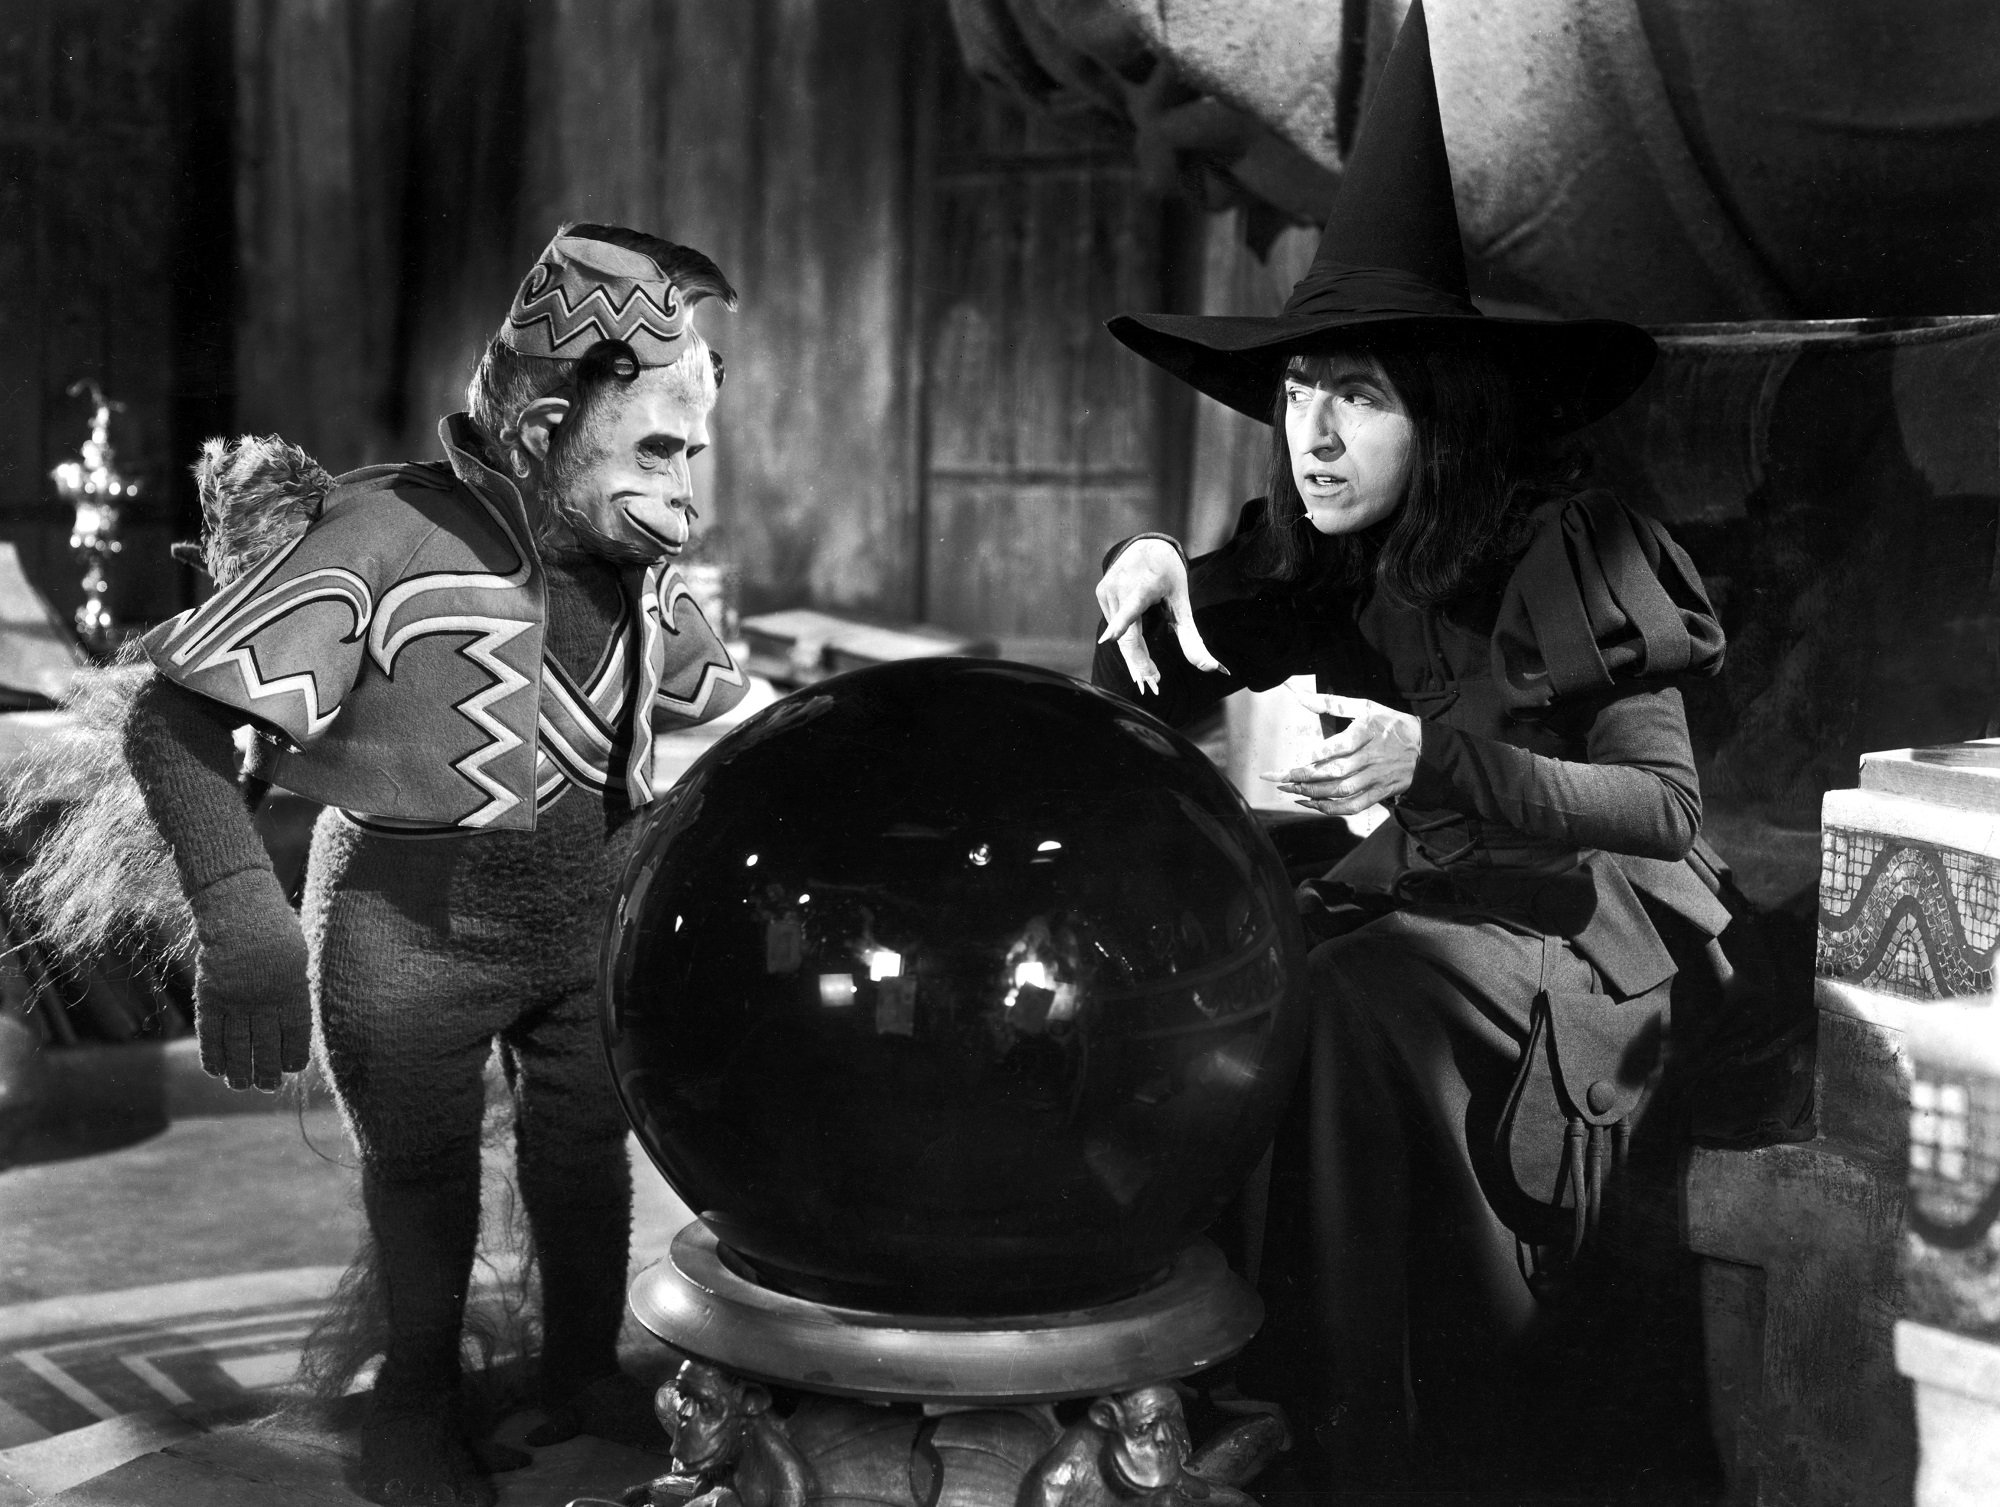 American actor Margaret Hamilton (1902 - 1985) and a winged monkey look into a crystal ball in a still from the film, The Wizard of Oz, directed by Victor Fleming, 1939